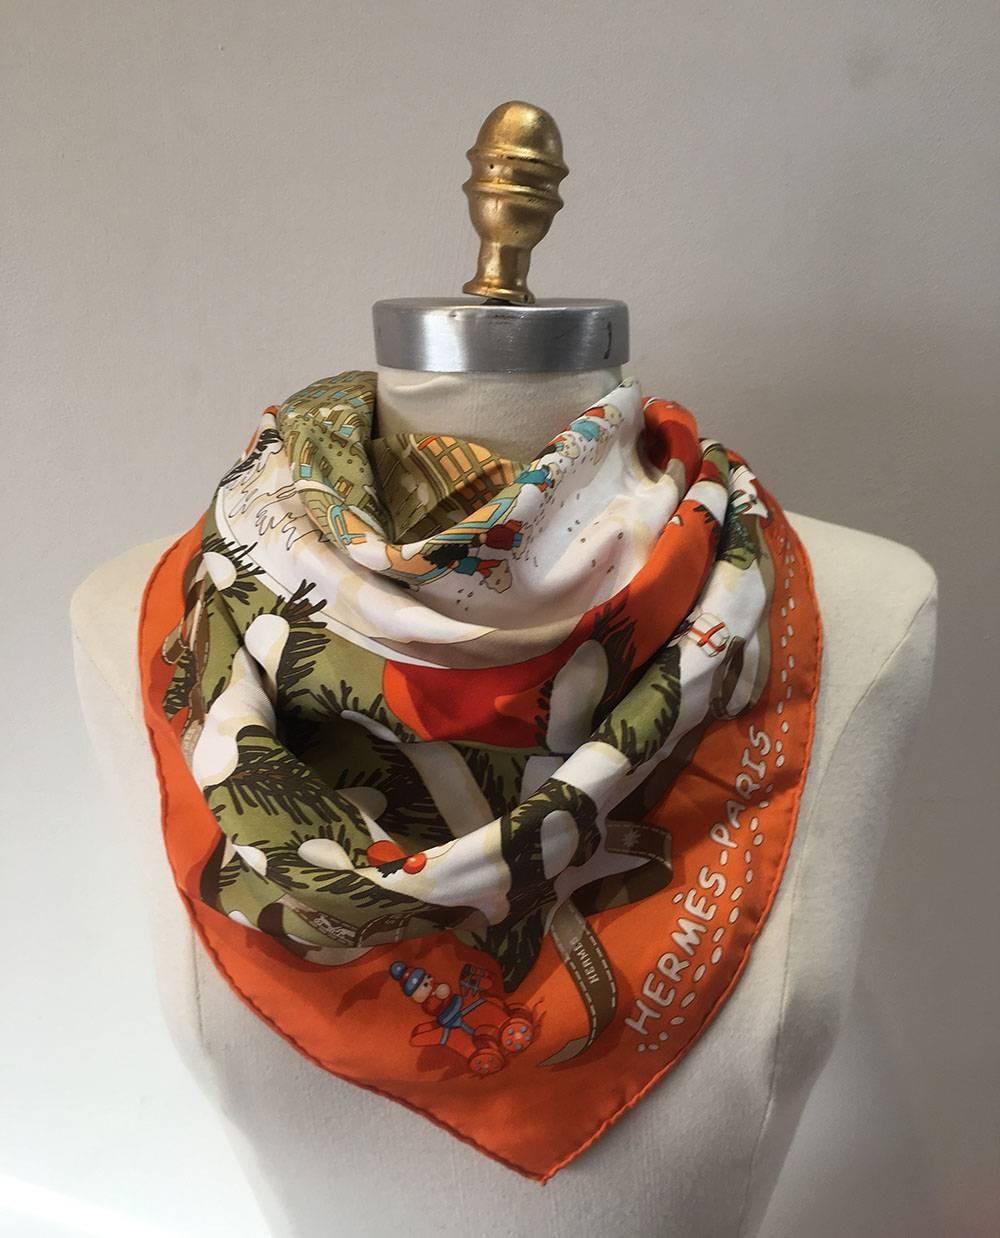 GORGEOUS Hermes limited edition noel au 24 Faubourg silk scarf in excellent condition.  Original silk screen design c2004 by Dimitri Rybaltchenko features a festive snowy depiction of the original Hermes storefront inside a snow globe surrounded by